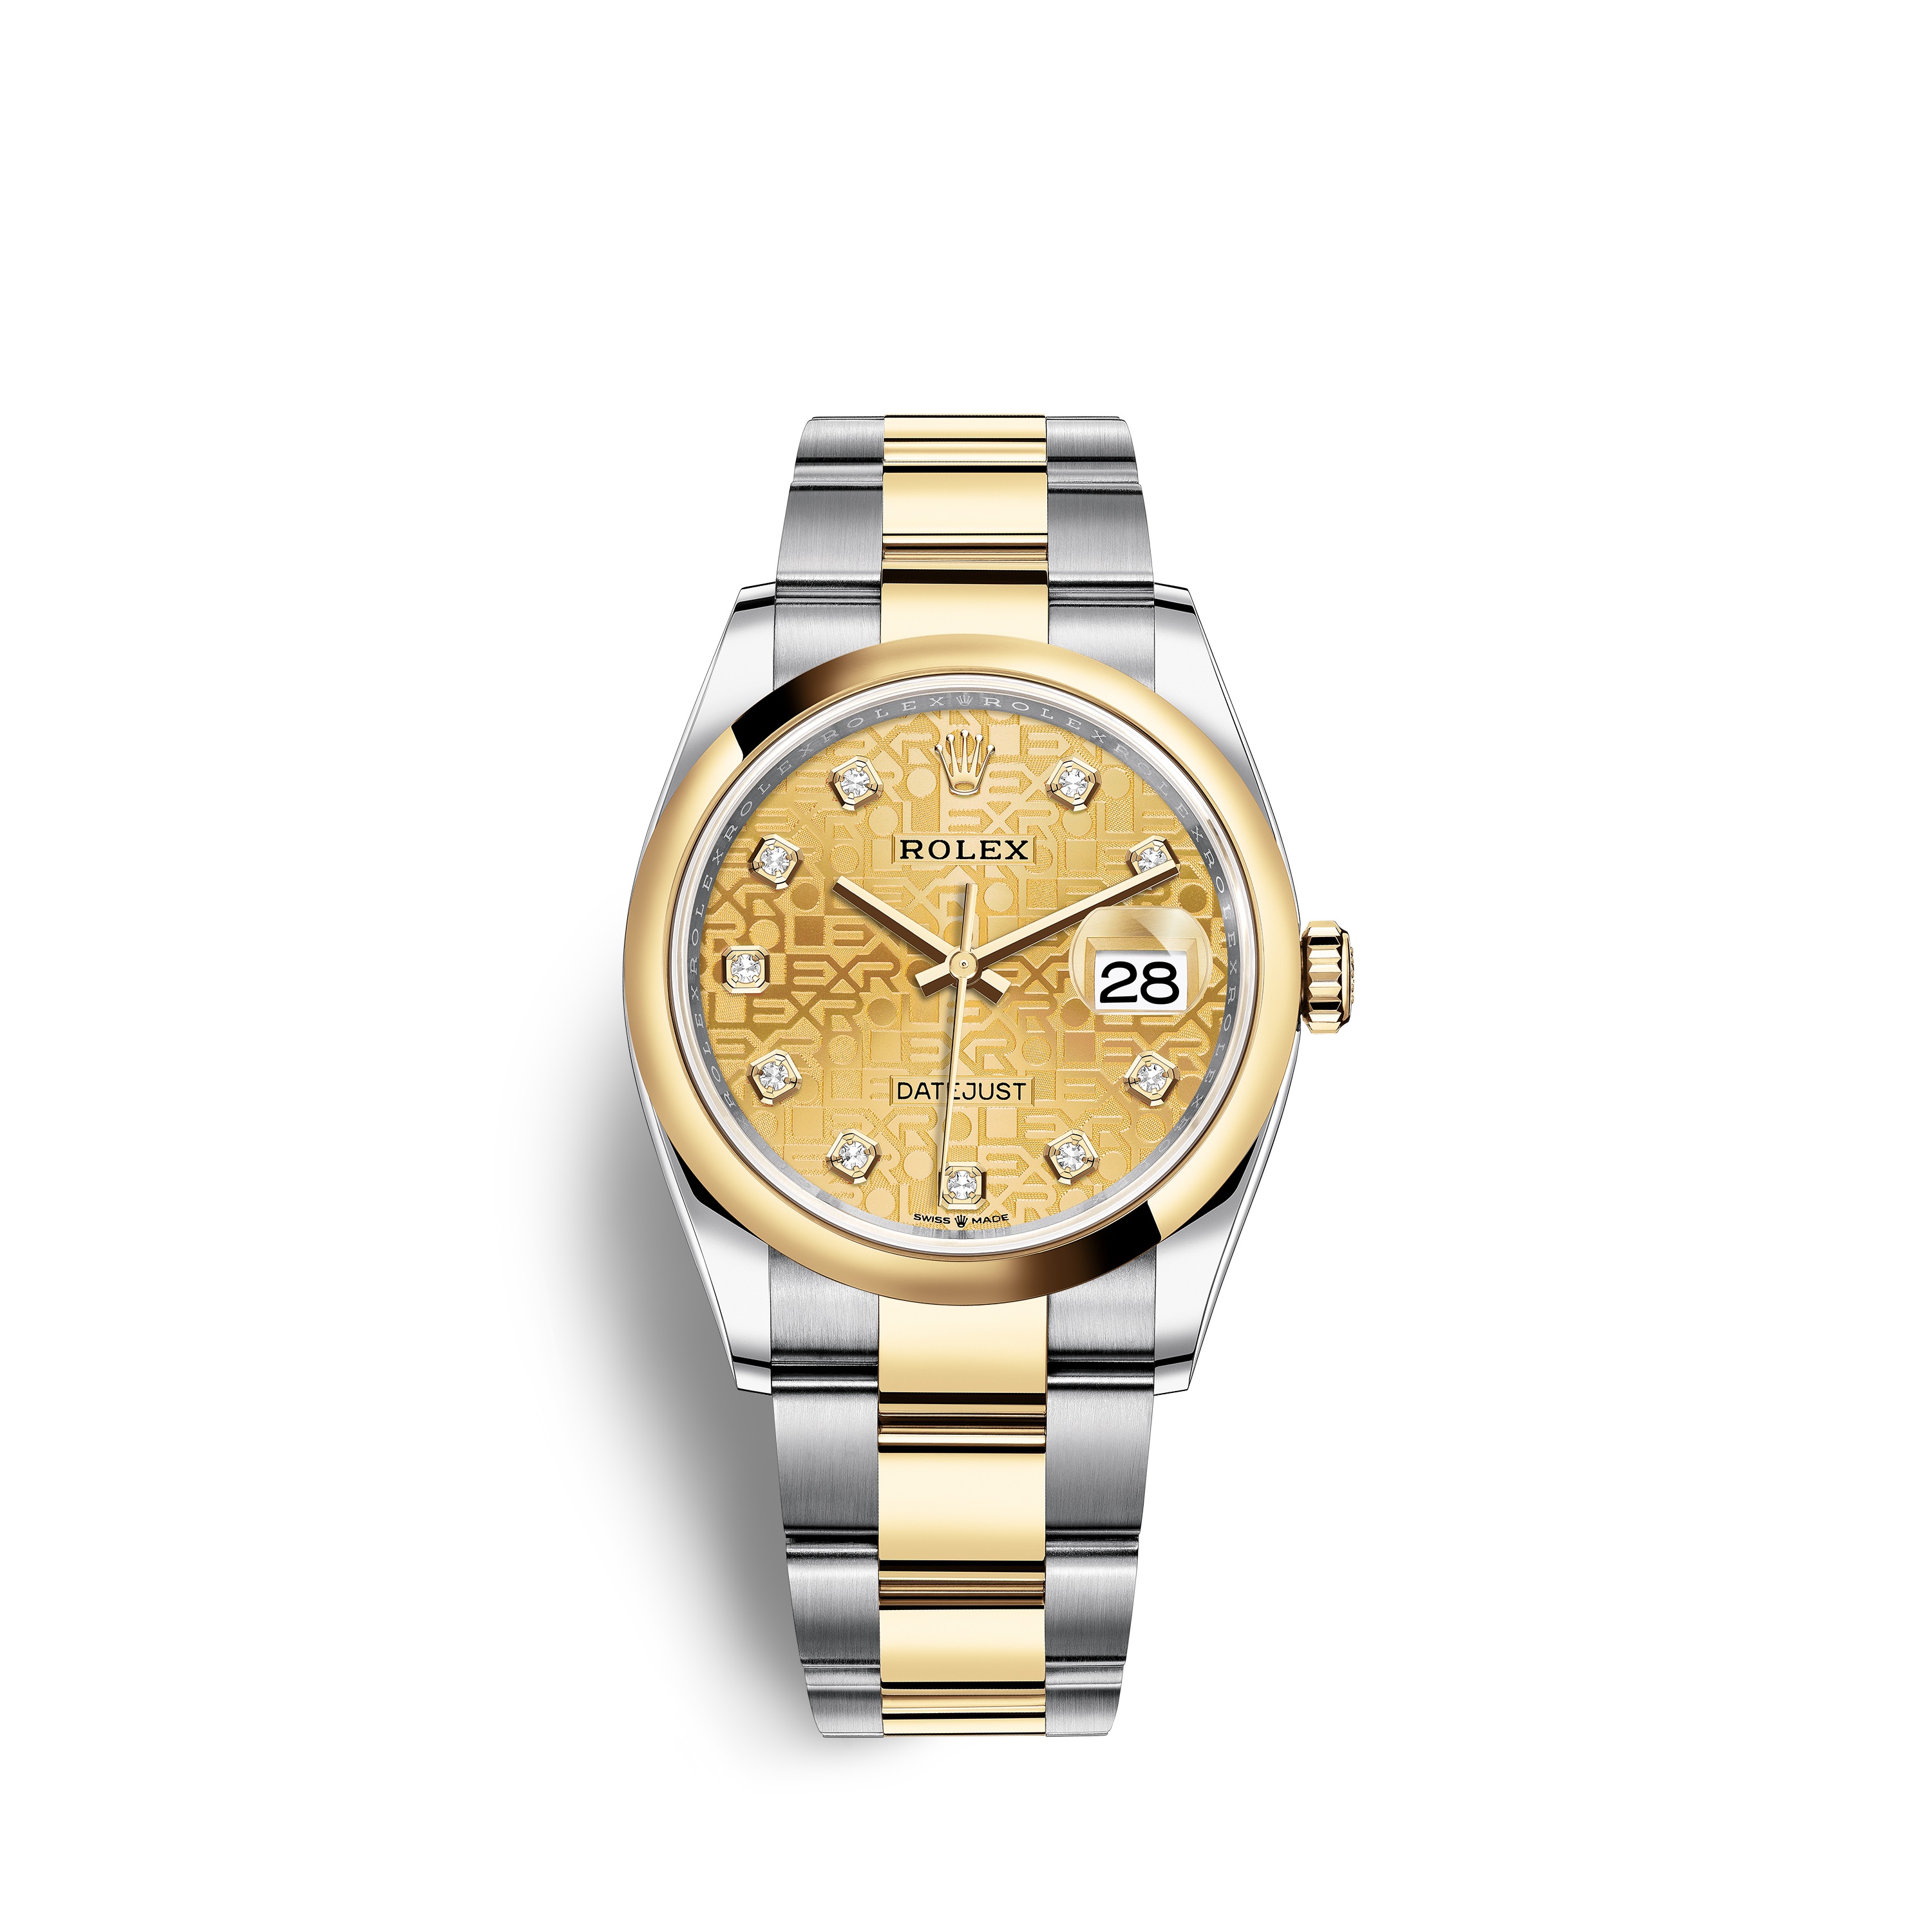 Datejust 36 126203 Gold & Stainless Steel Watch (Champagne-Colour Set with Diamonds)